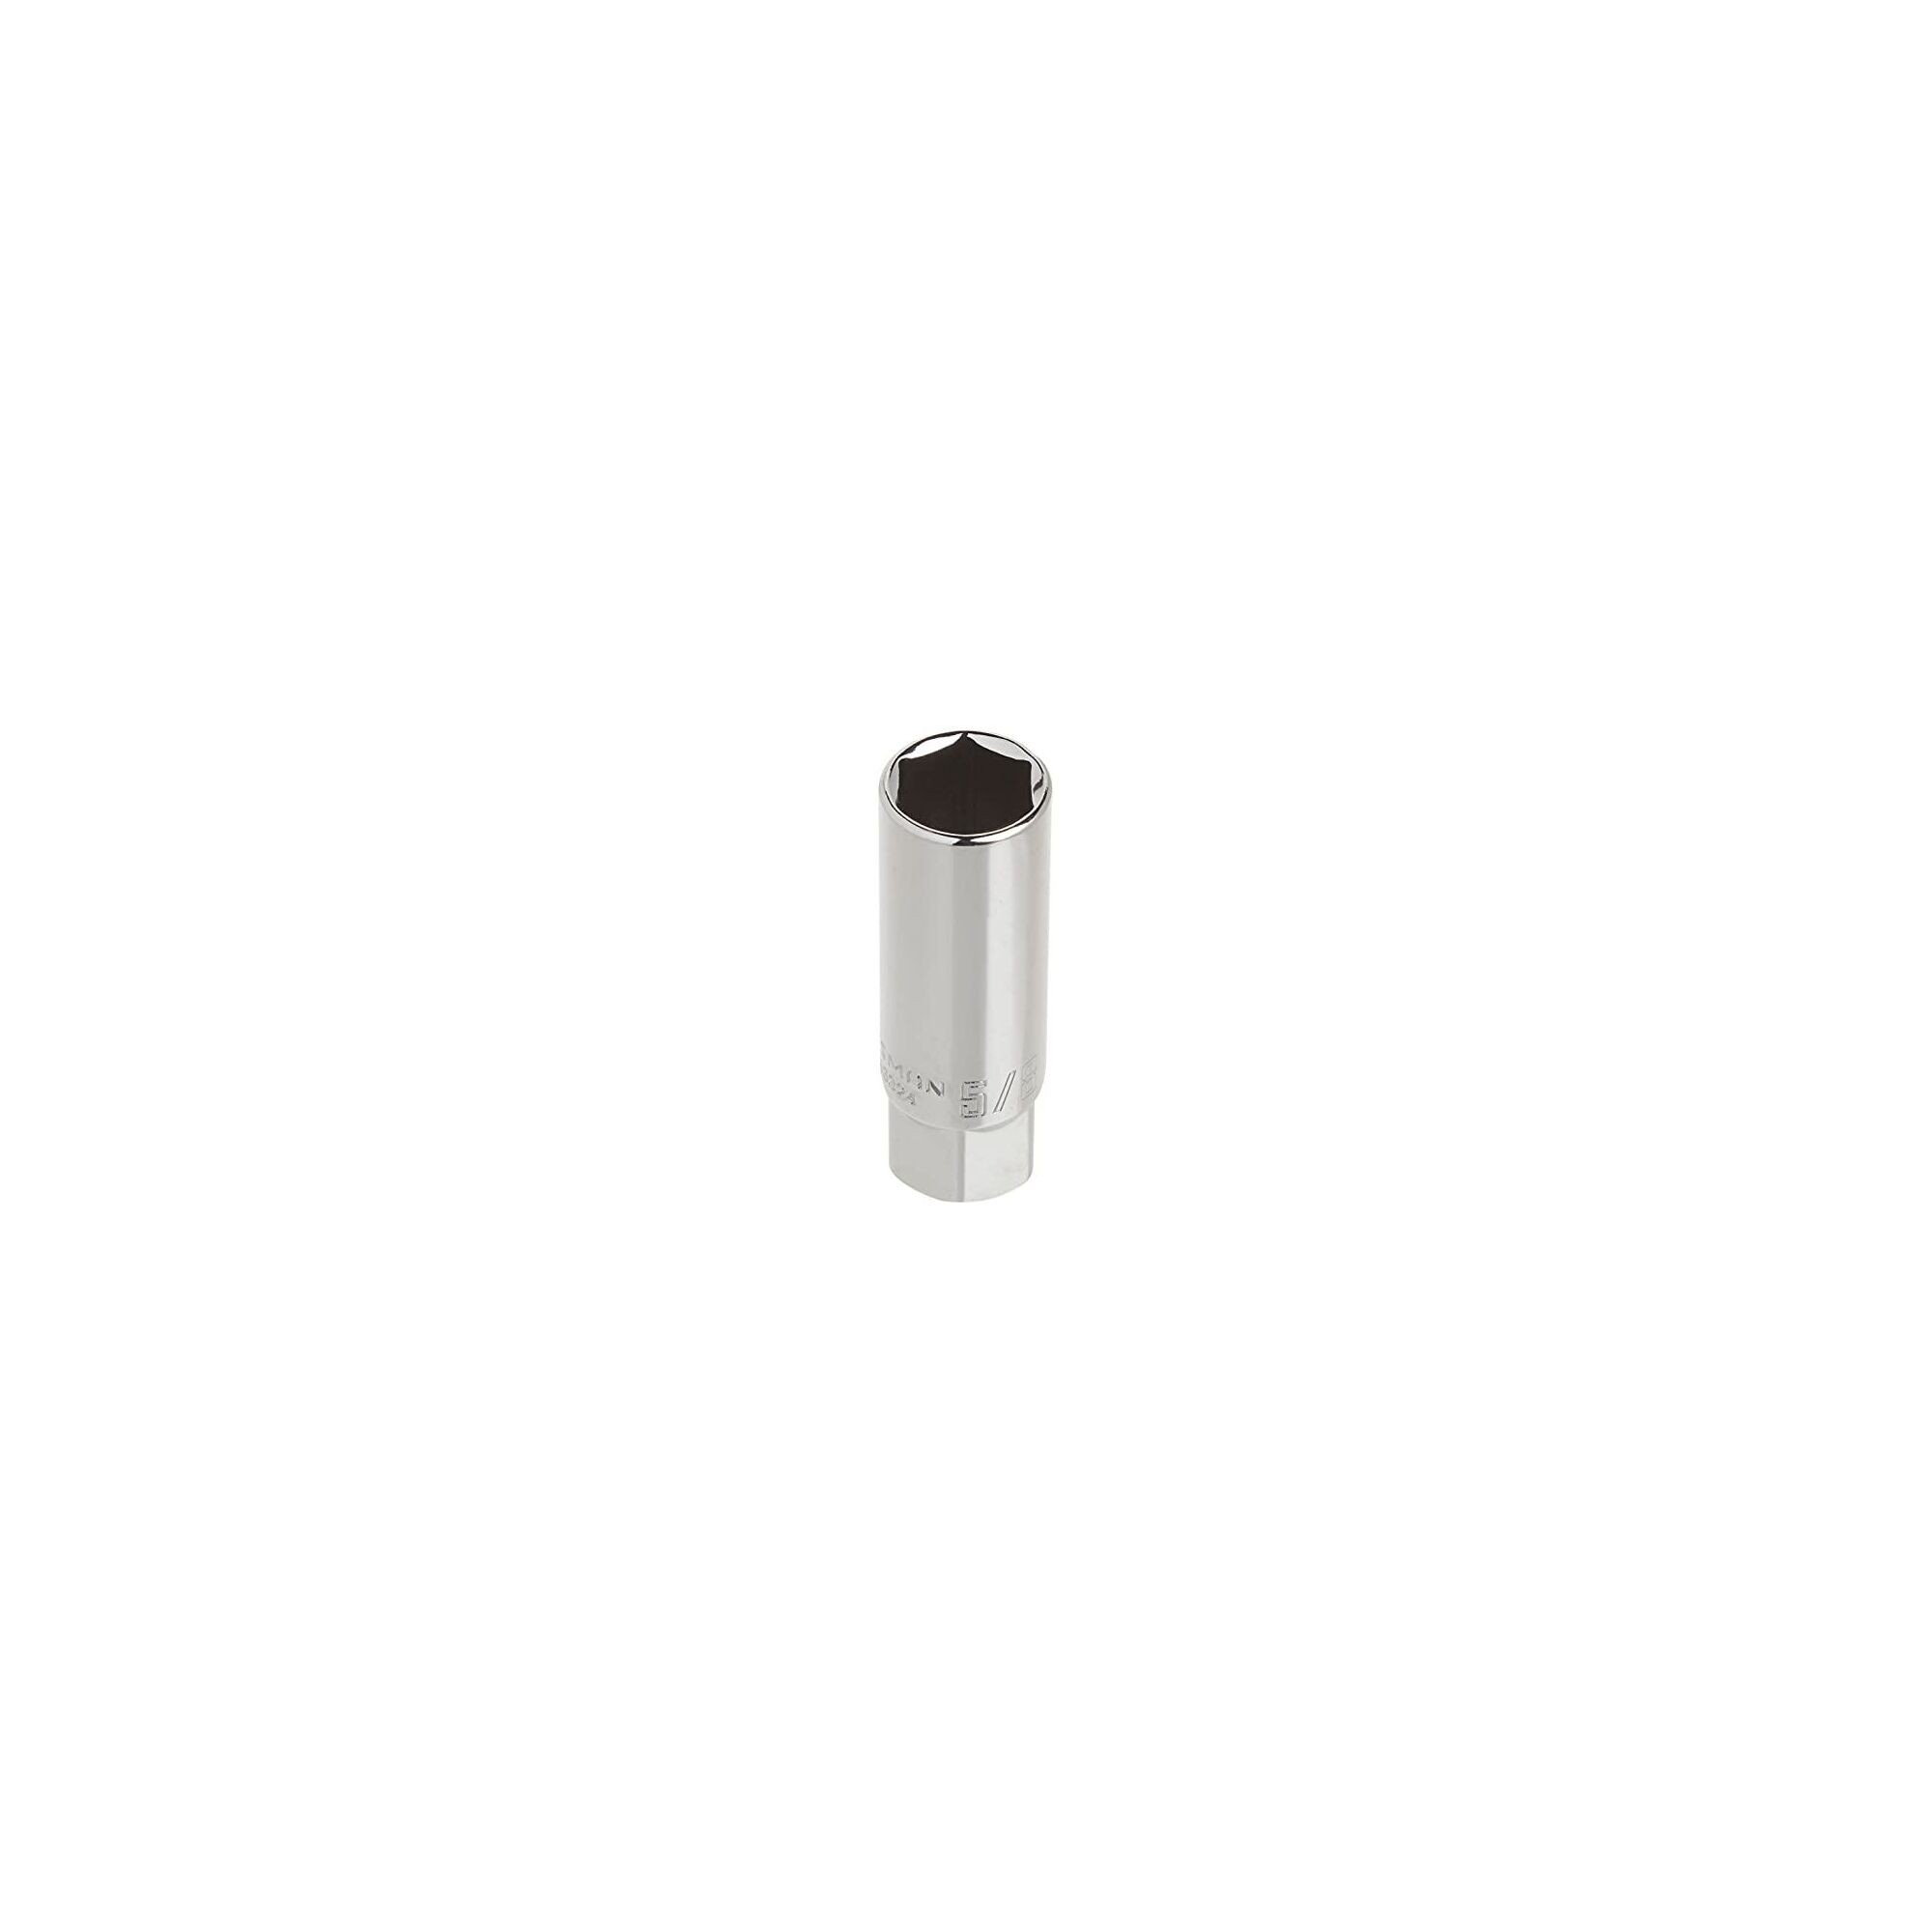 View of CRAFTSMAN Sockets on white background